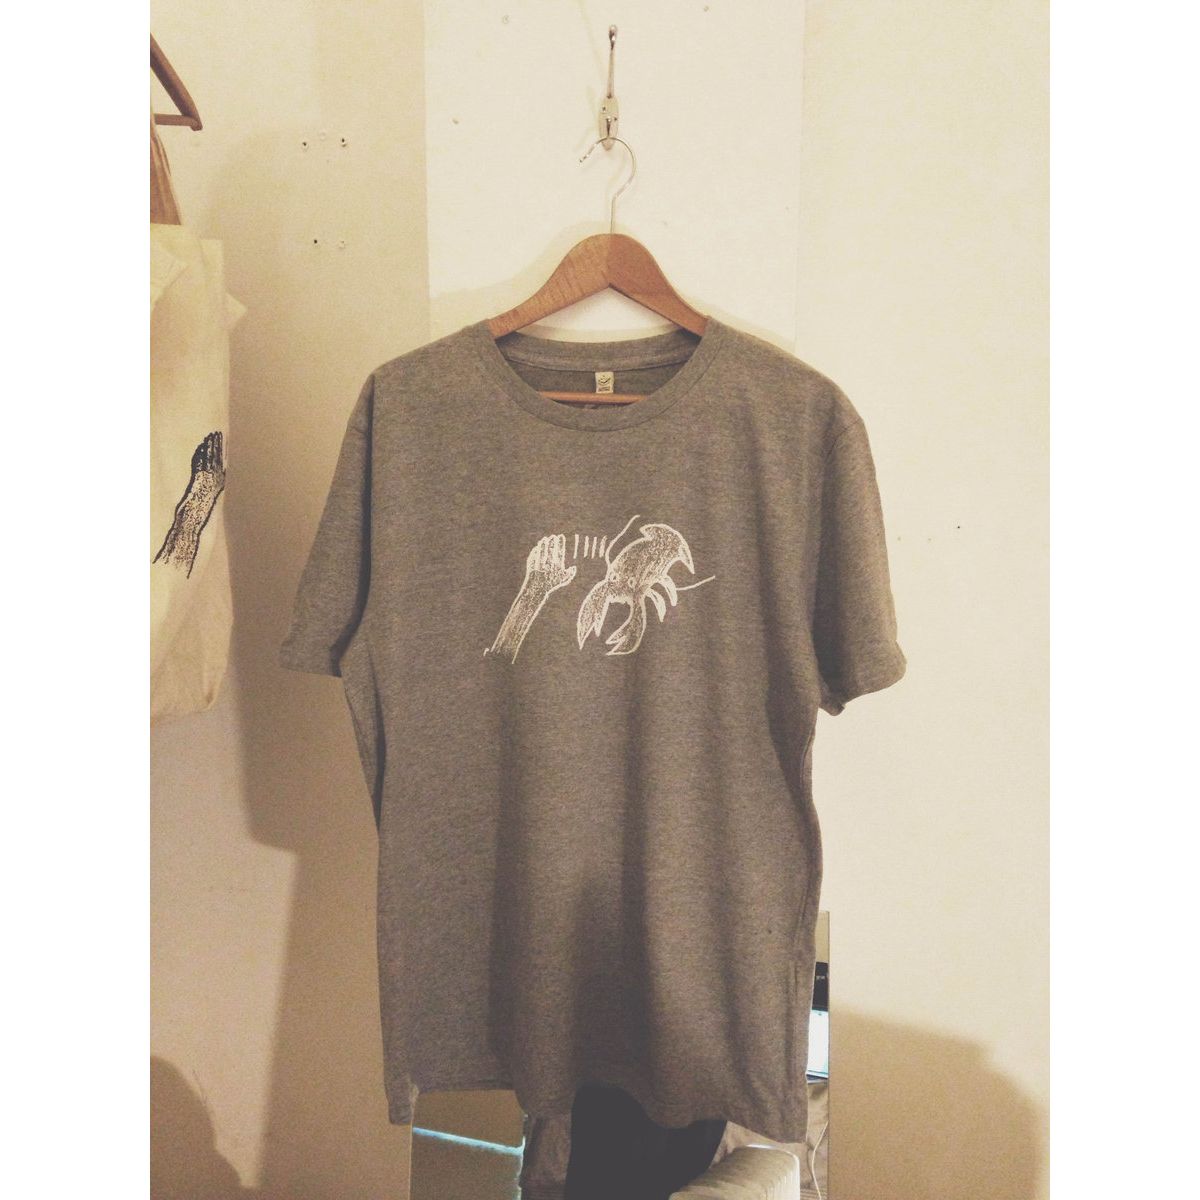 LOBSTER THEREMIN / LOBSTER THEREMIN LOGO T-SHIRT GREY SIZE:S